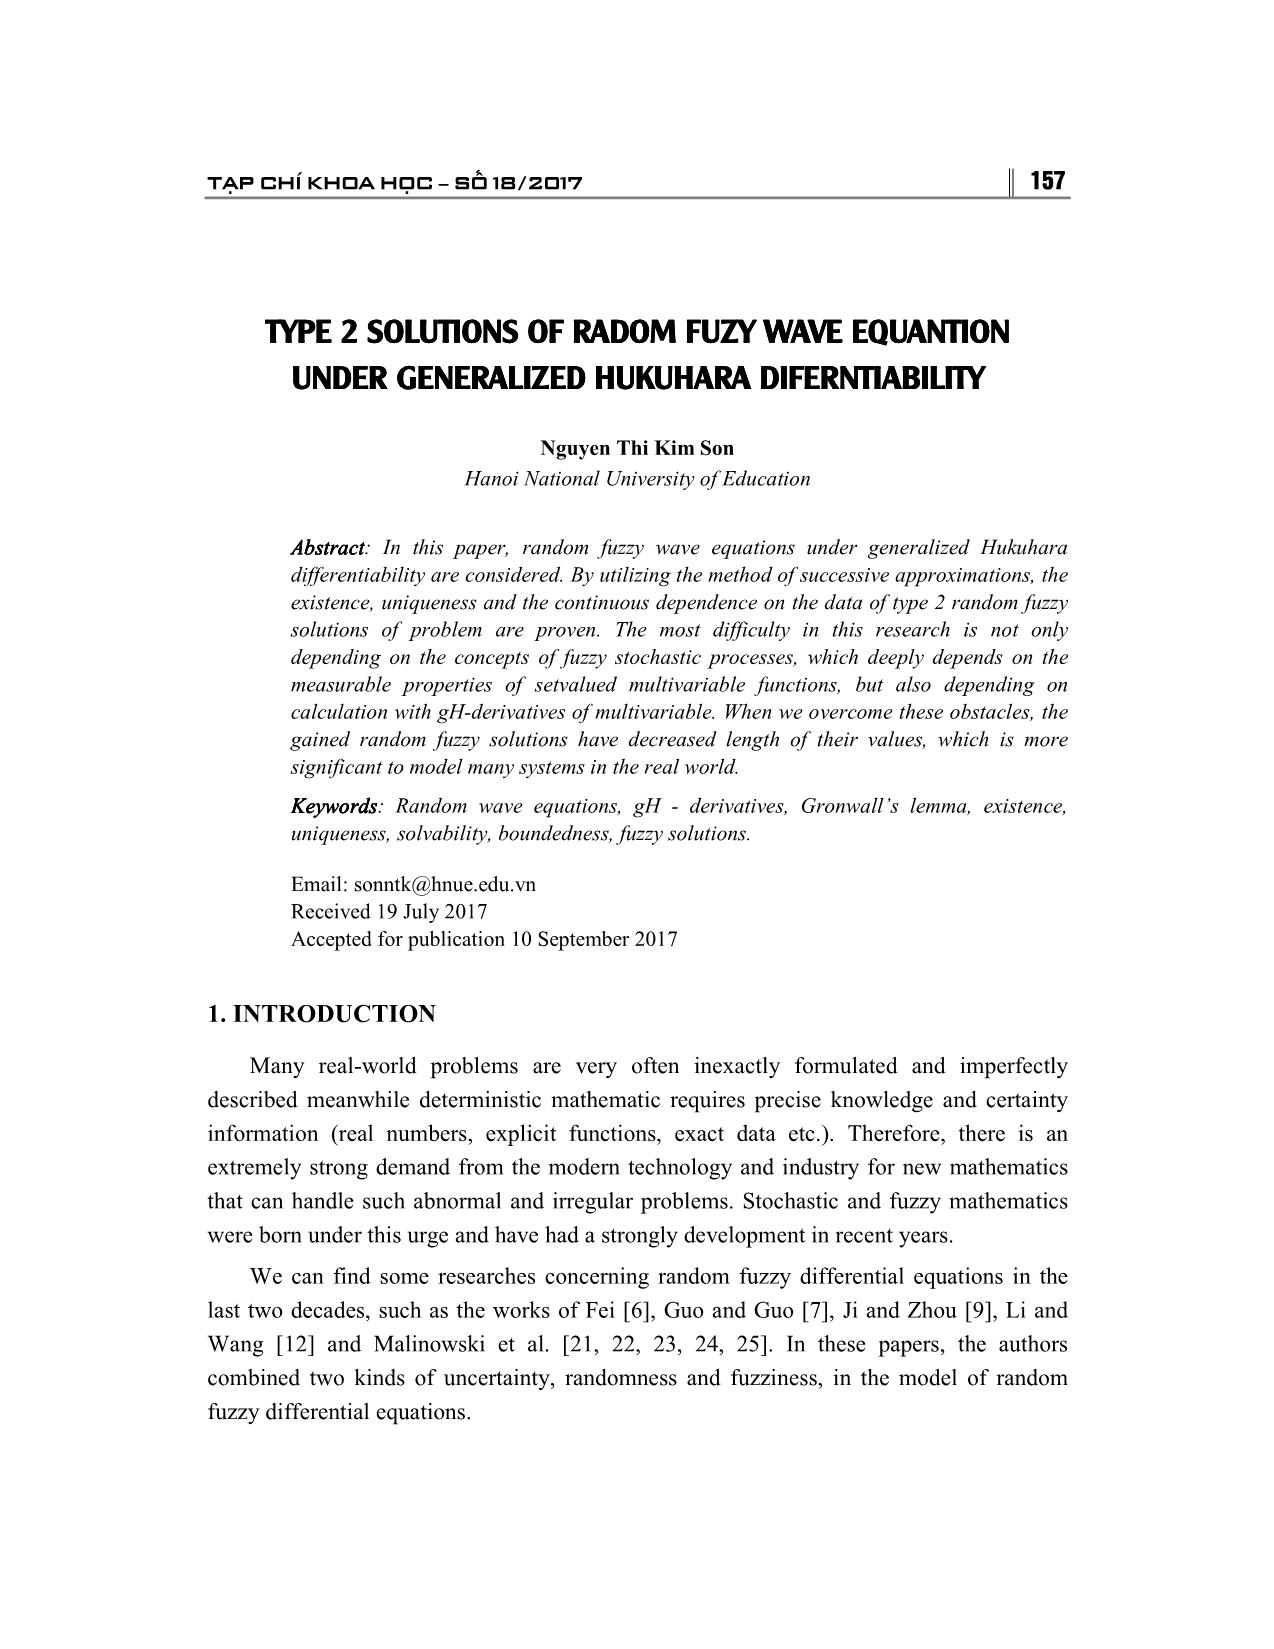 Type 2 solutions of radom fuzy wave equantion under generalized hukuhara diferntiability trang 1